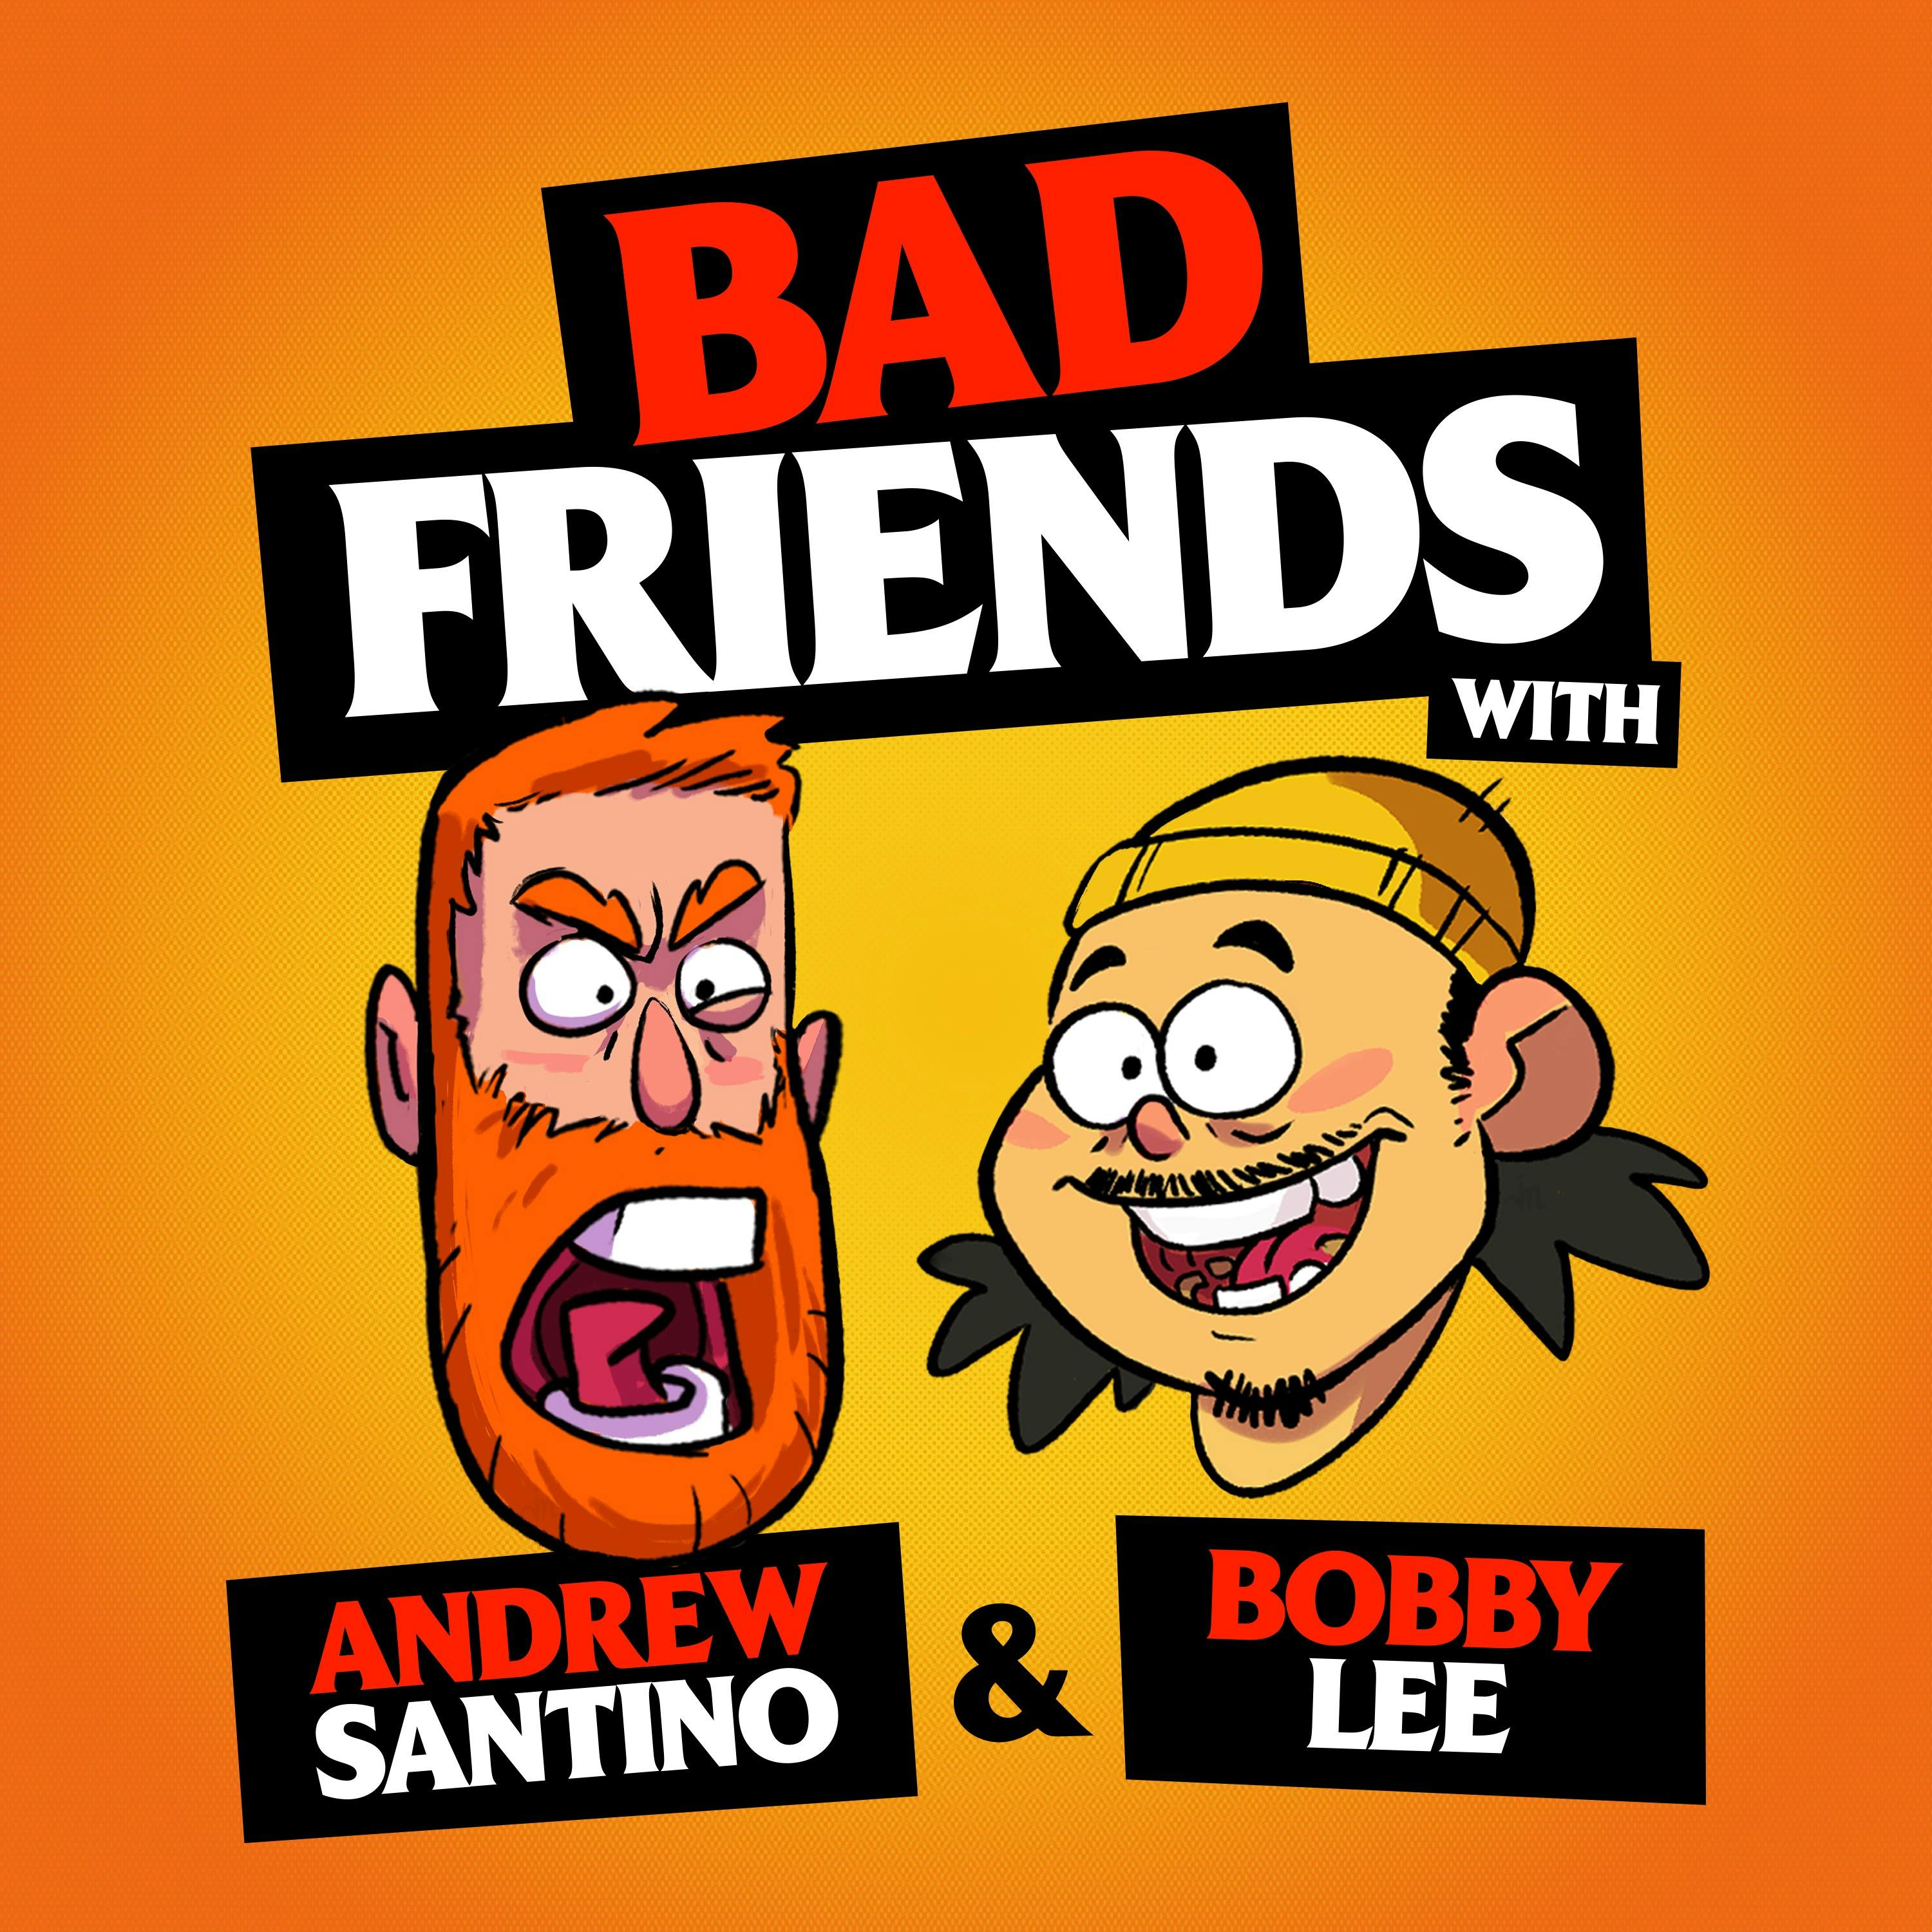 We Win the Podcast Wars  by Andrew Santino and Bobby Lee